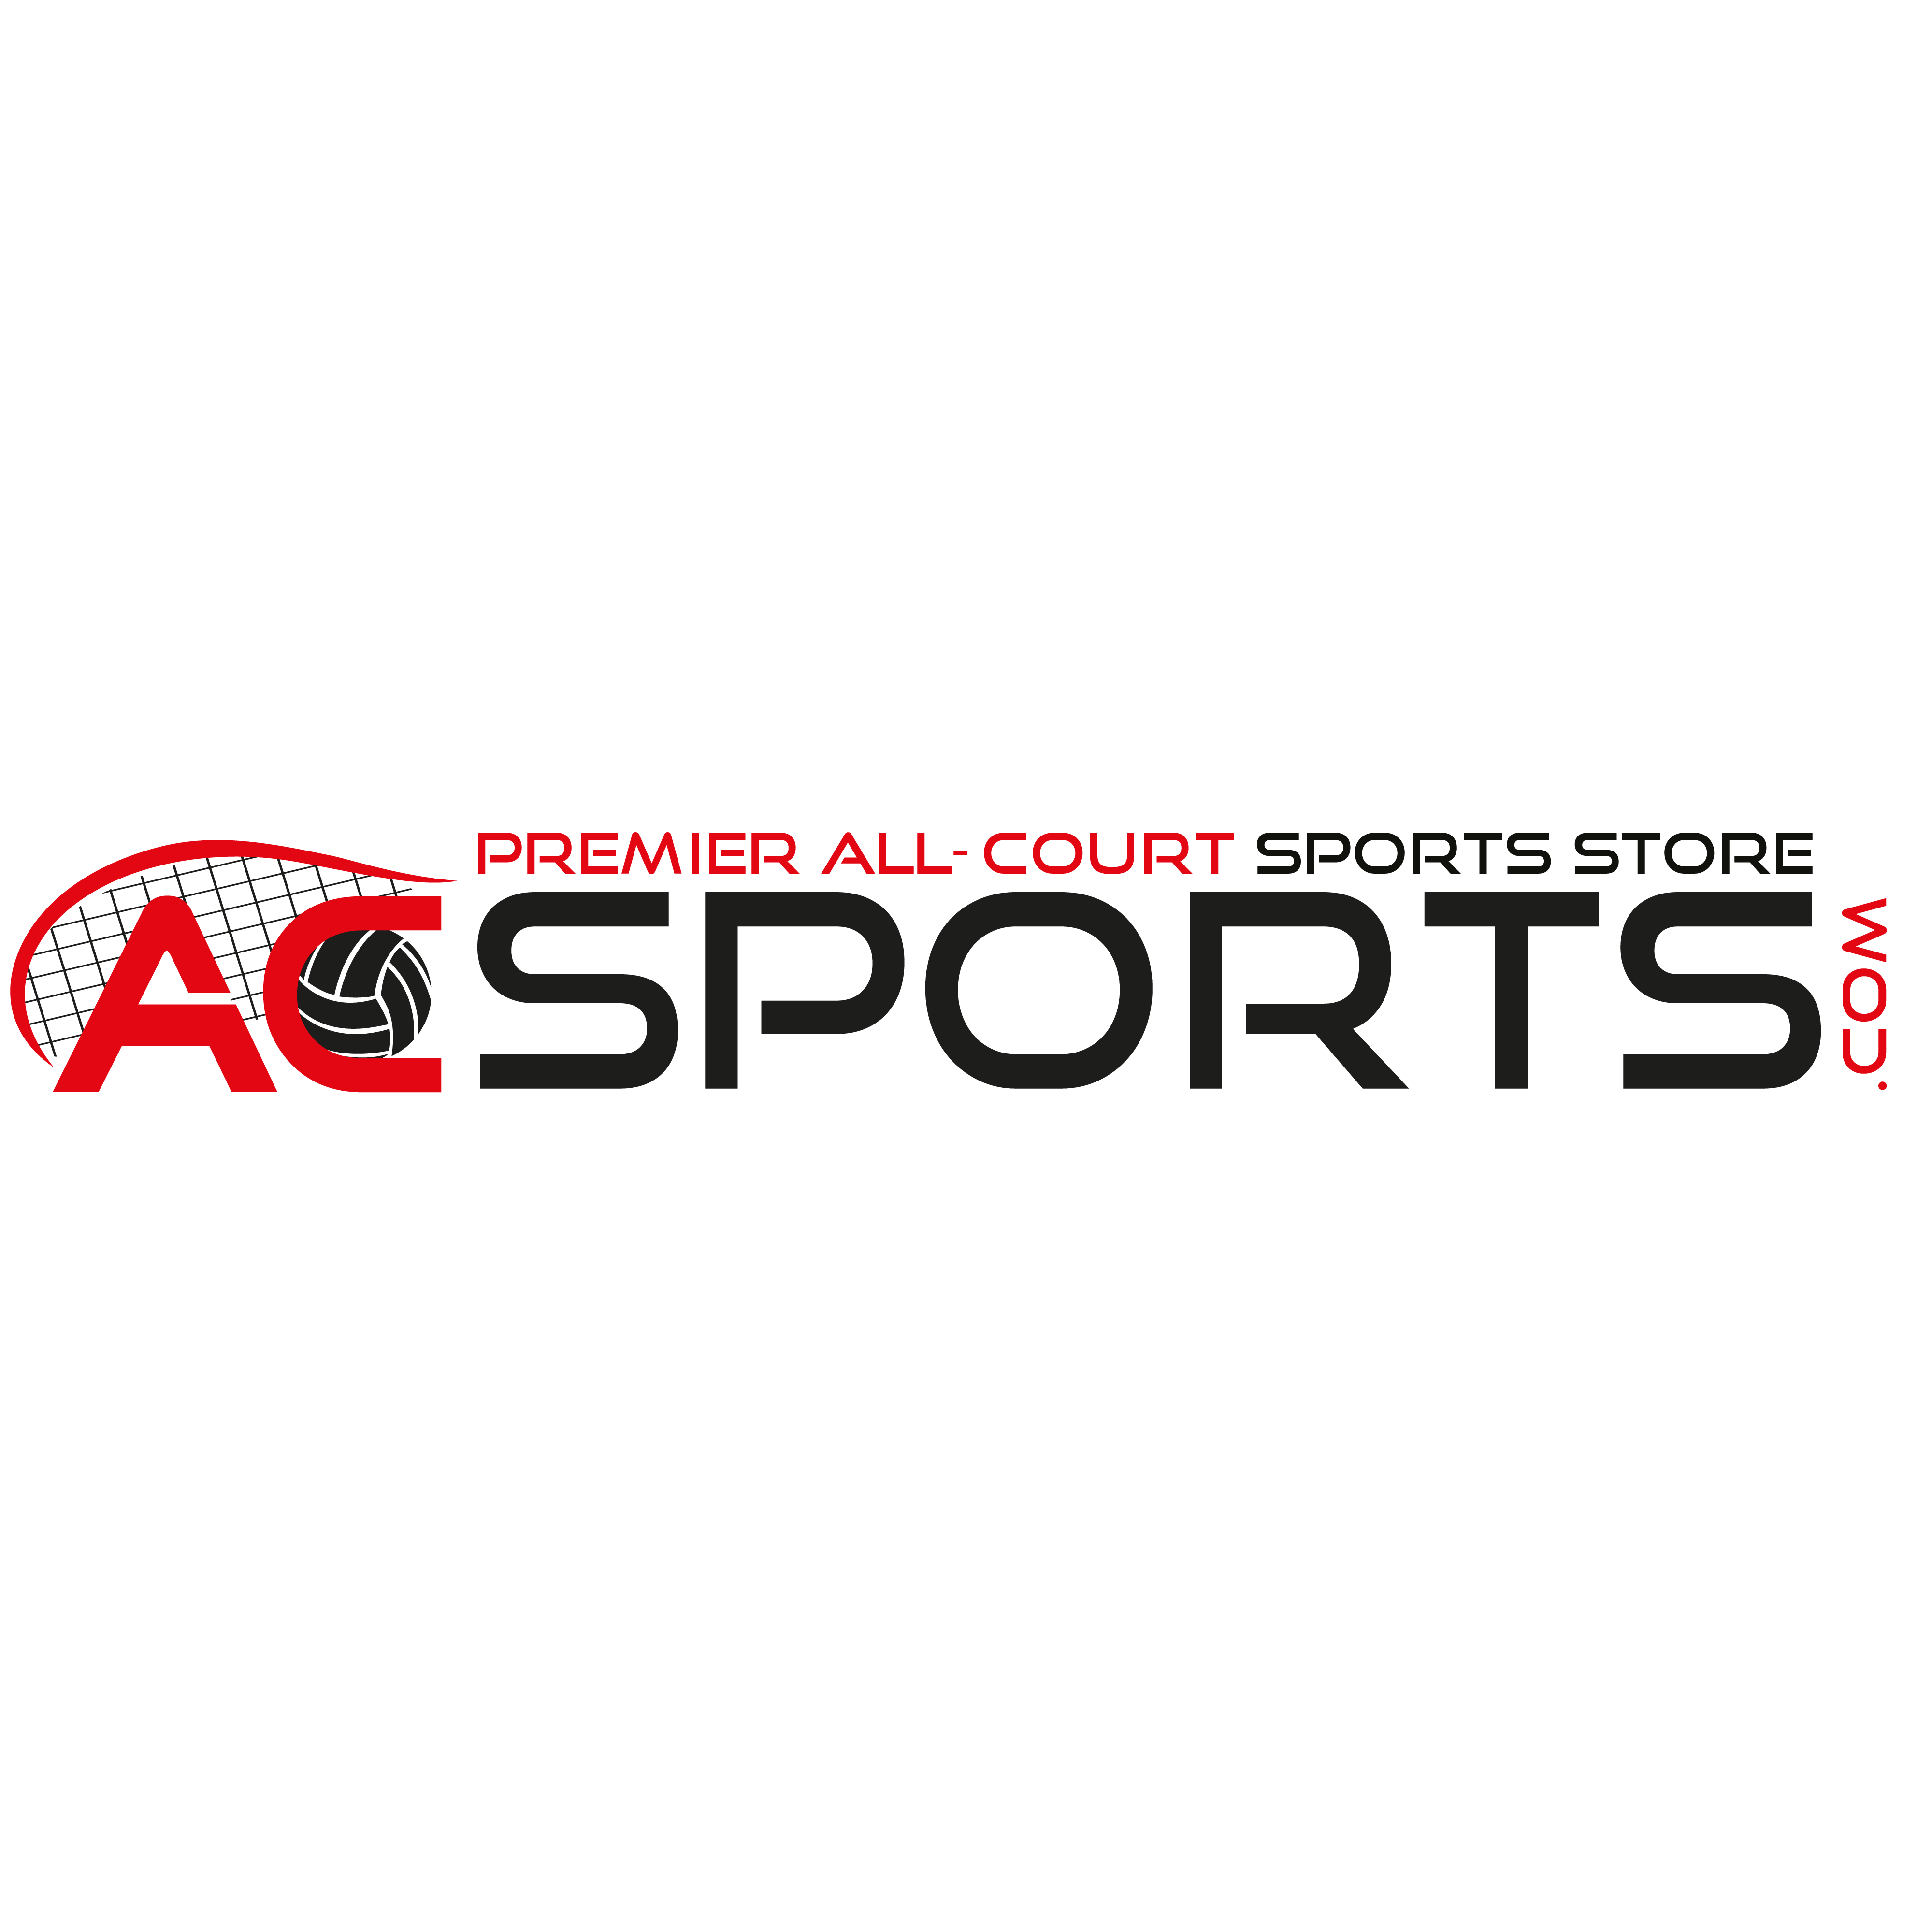 ACSports is a premier all-court sporting goods store specializing in racquet sports, Volleyball, and Dodgeball. We are based in Vancouver, BC, Canada.